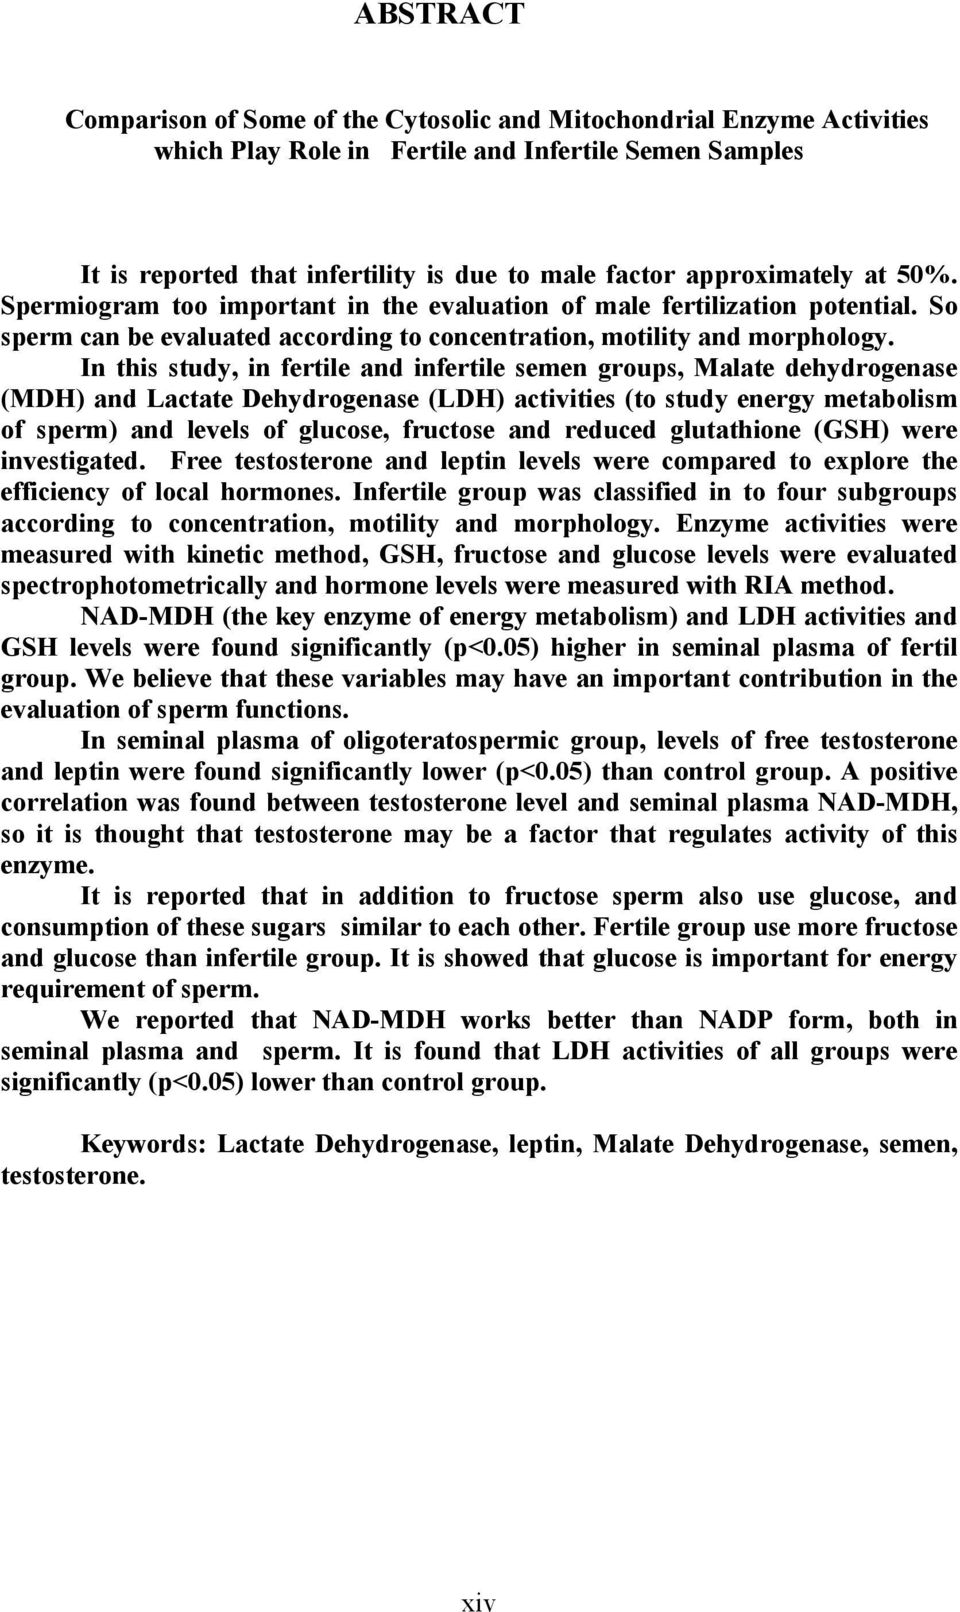 In this study, in fertile and infertile semen groups, Malate dehydrogenase (MDH) and Lactate Dehydrogenase (LDH) activities (to study energy metabolism of sperm) and levels of glucose, fructose and